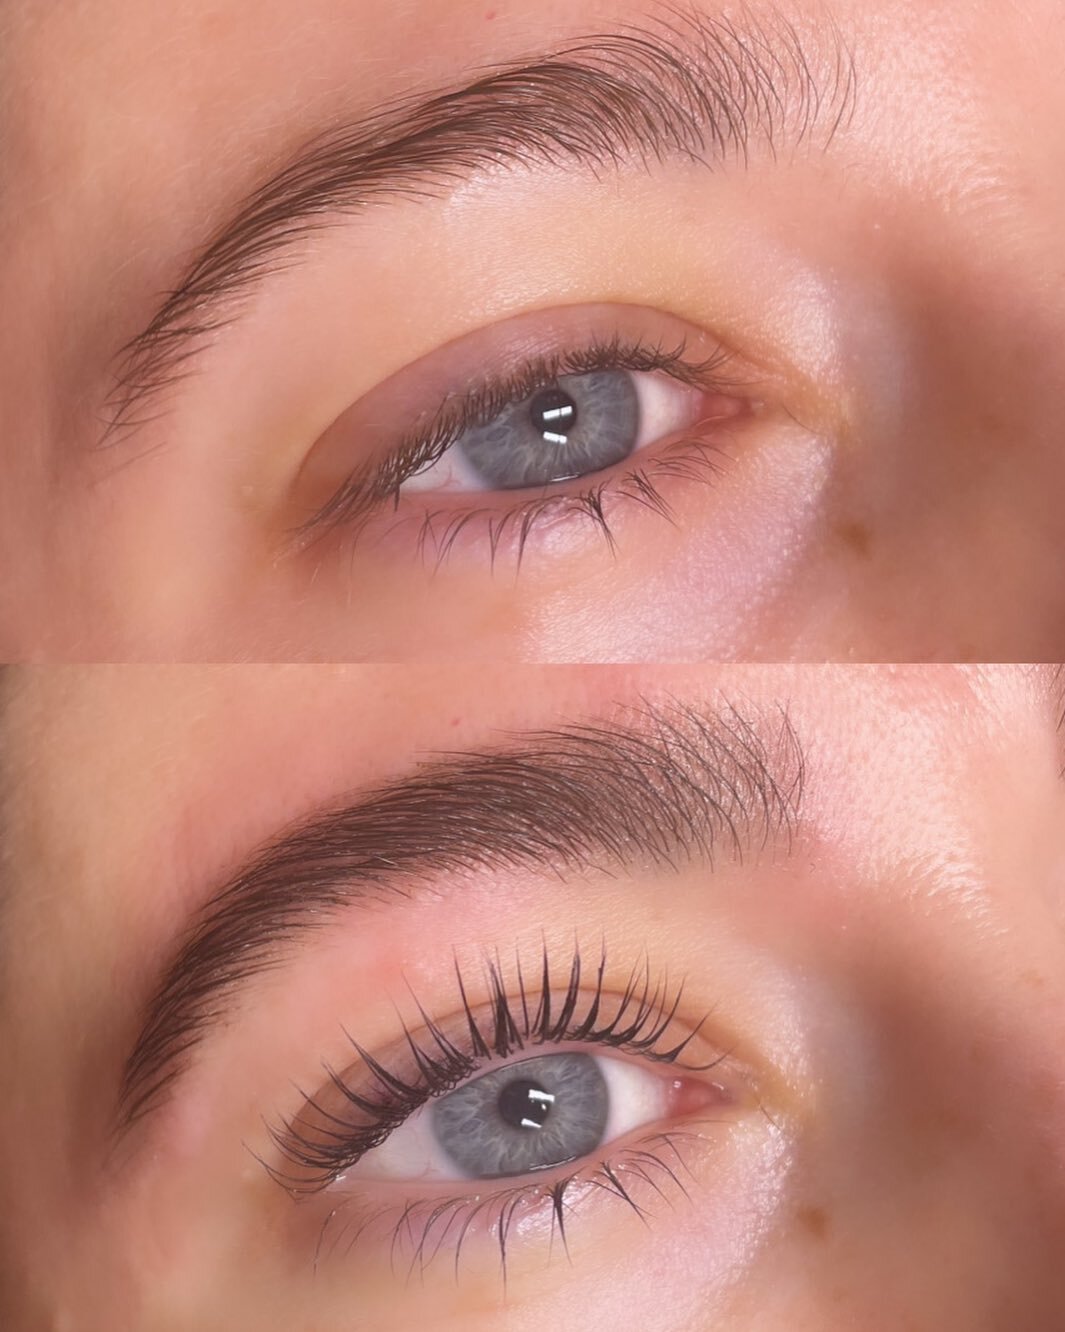 Dreamy little Lash lift &amp; Brow duo. Making those eyes P O P 💥

.
.
.
.

#ABR #ABRlashes #ABRbrows #yumi #yumilashes #yumilashlift #keratin #brows #browshaping #browtinting #beautyobsessed #browgoals #lashgoals